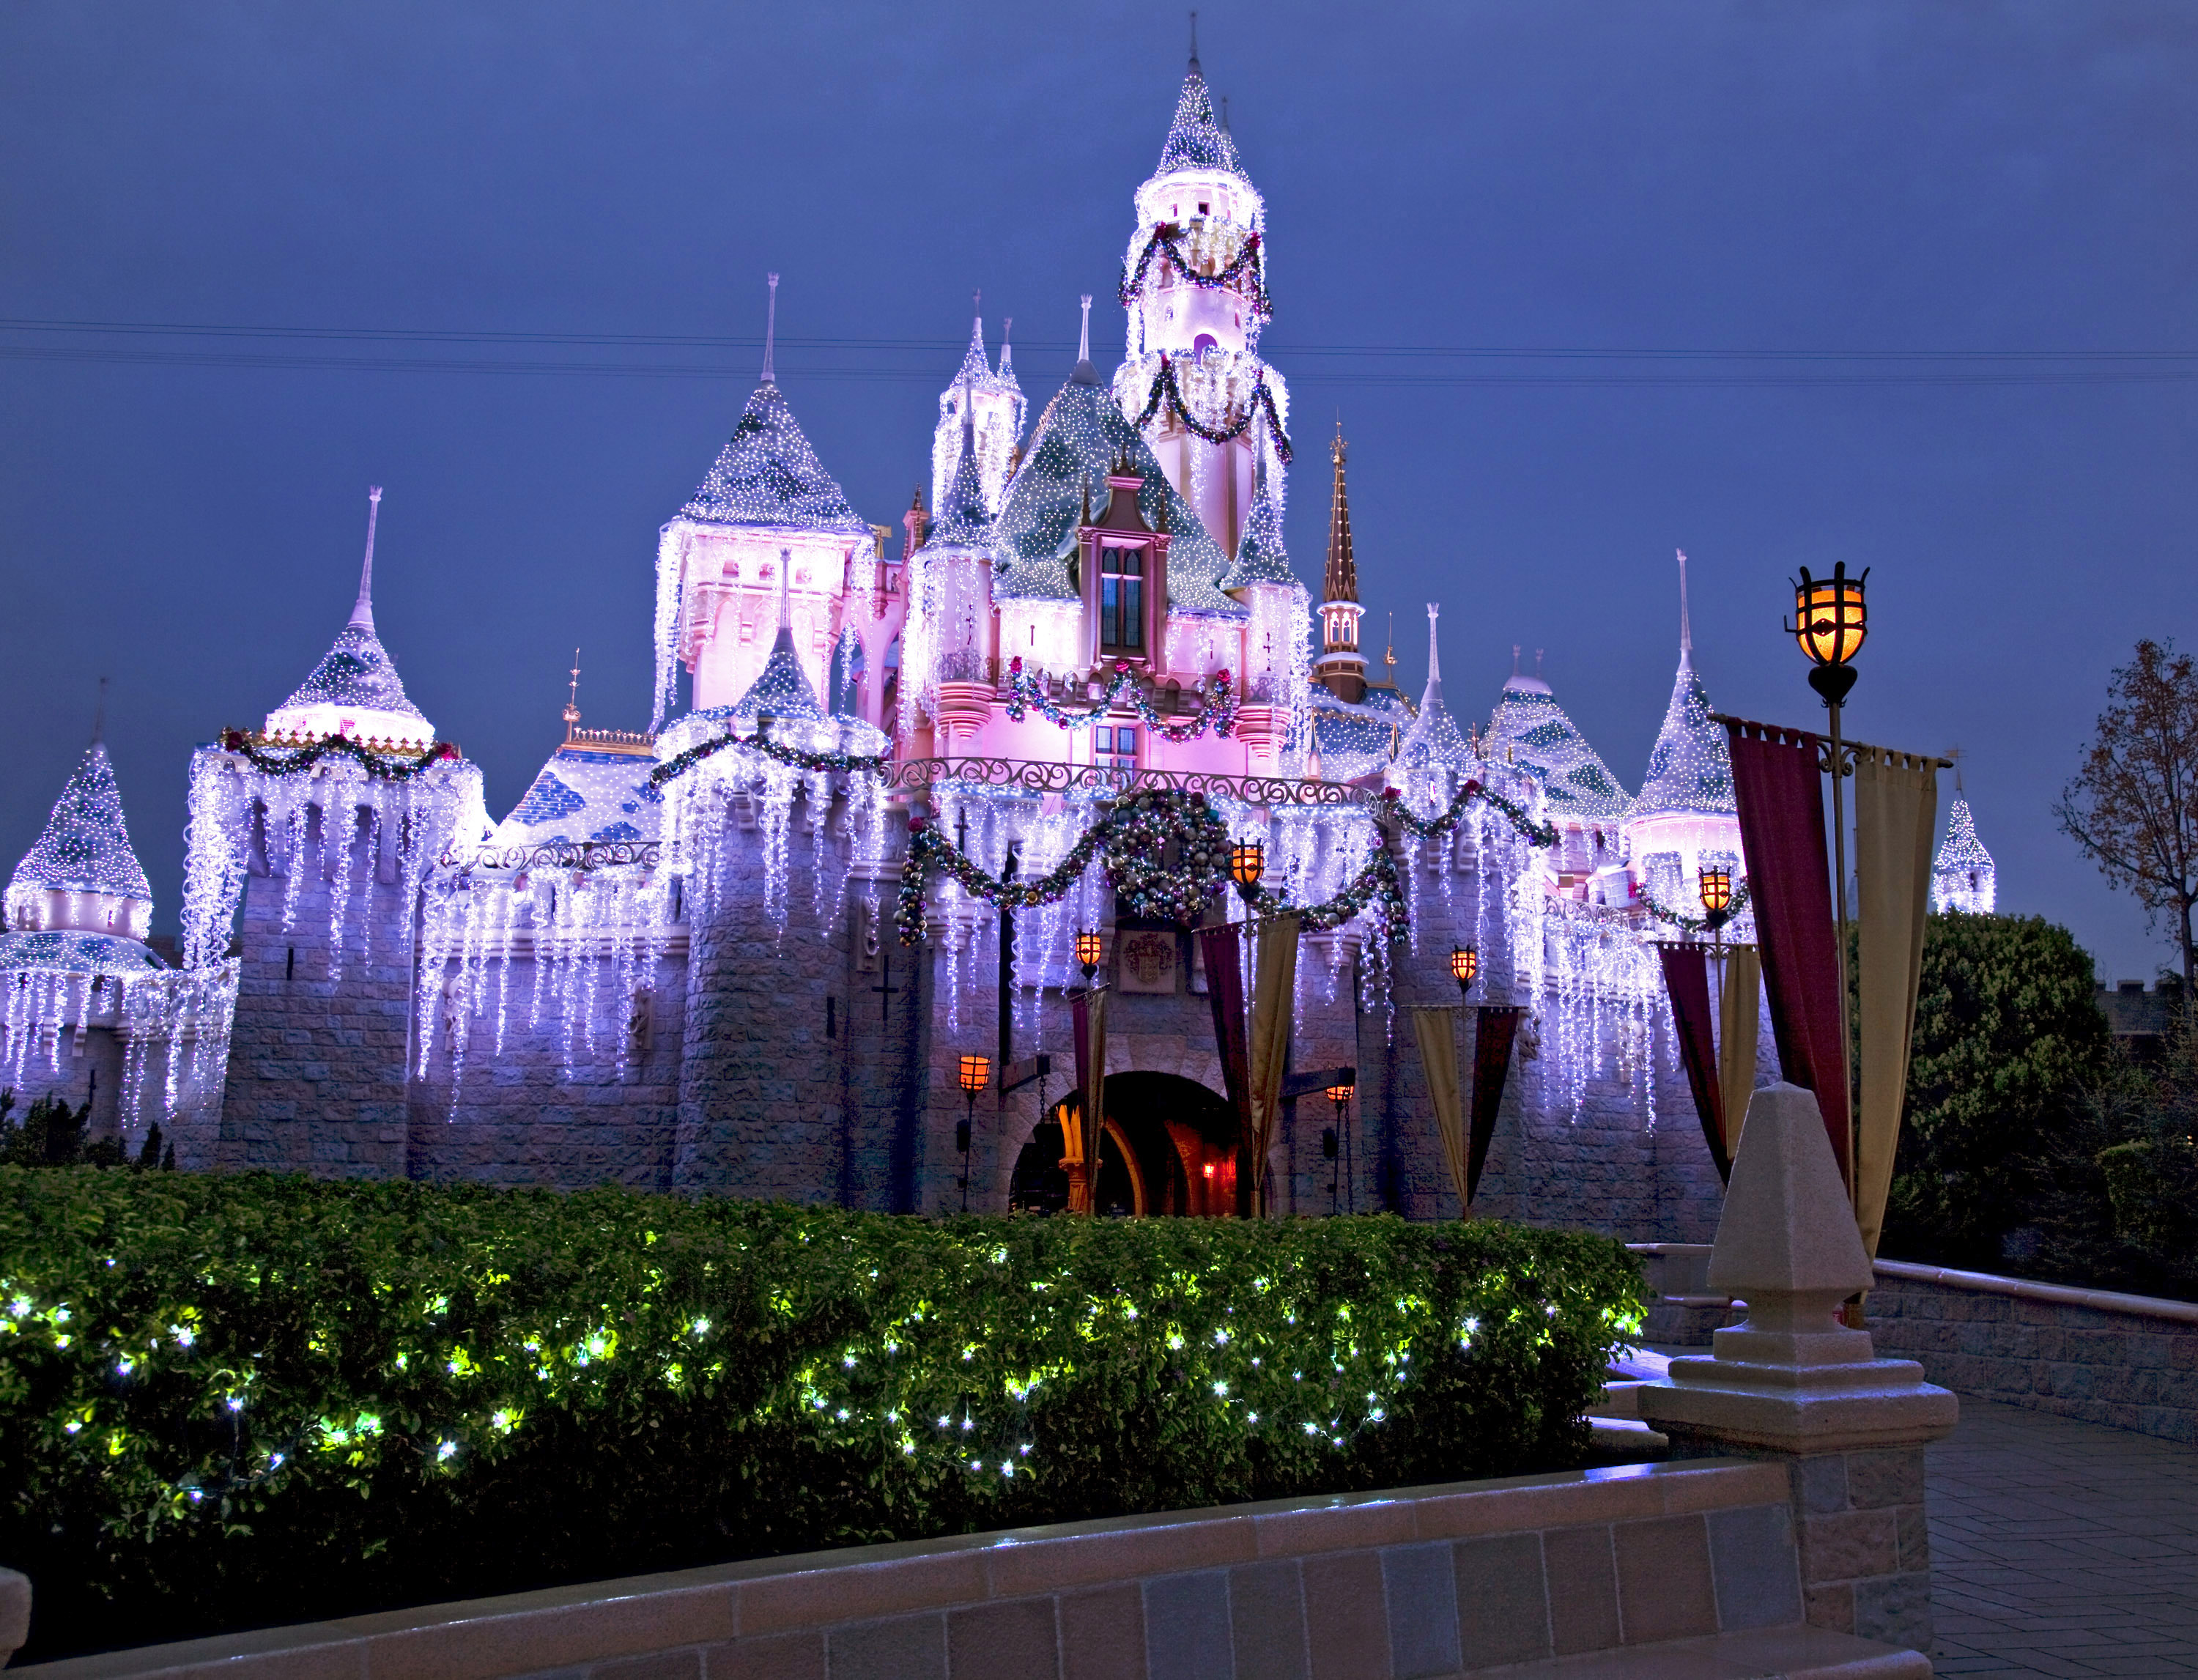 Celebrate Family and the Magic of the Holidays at Disneyland